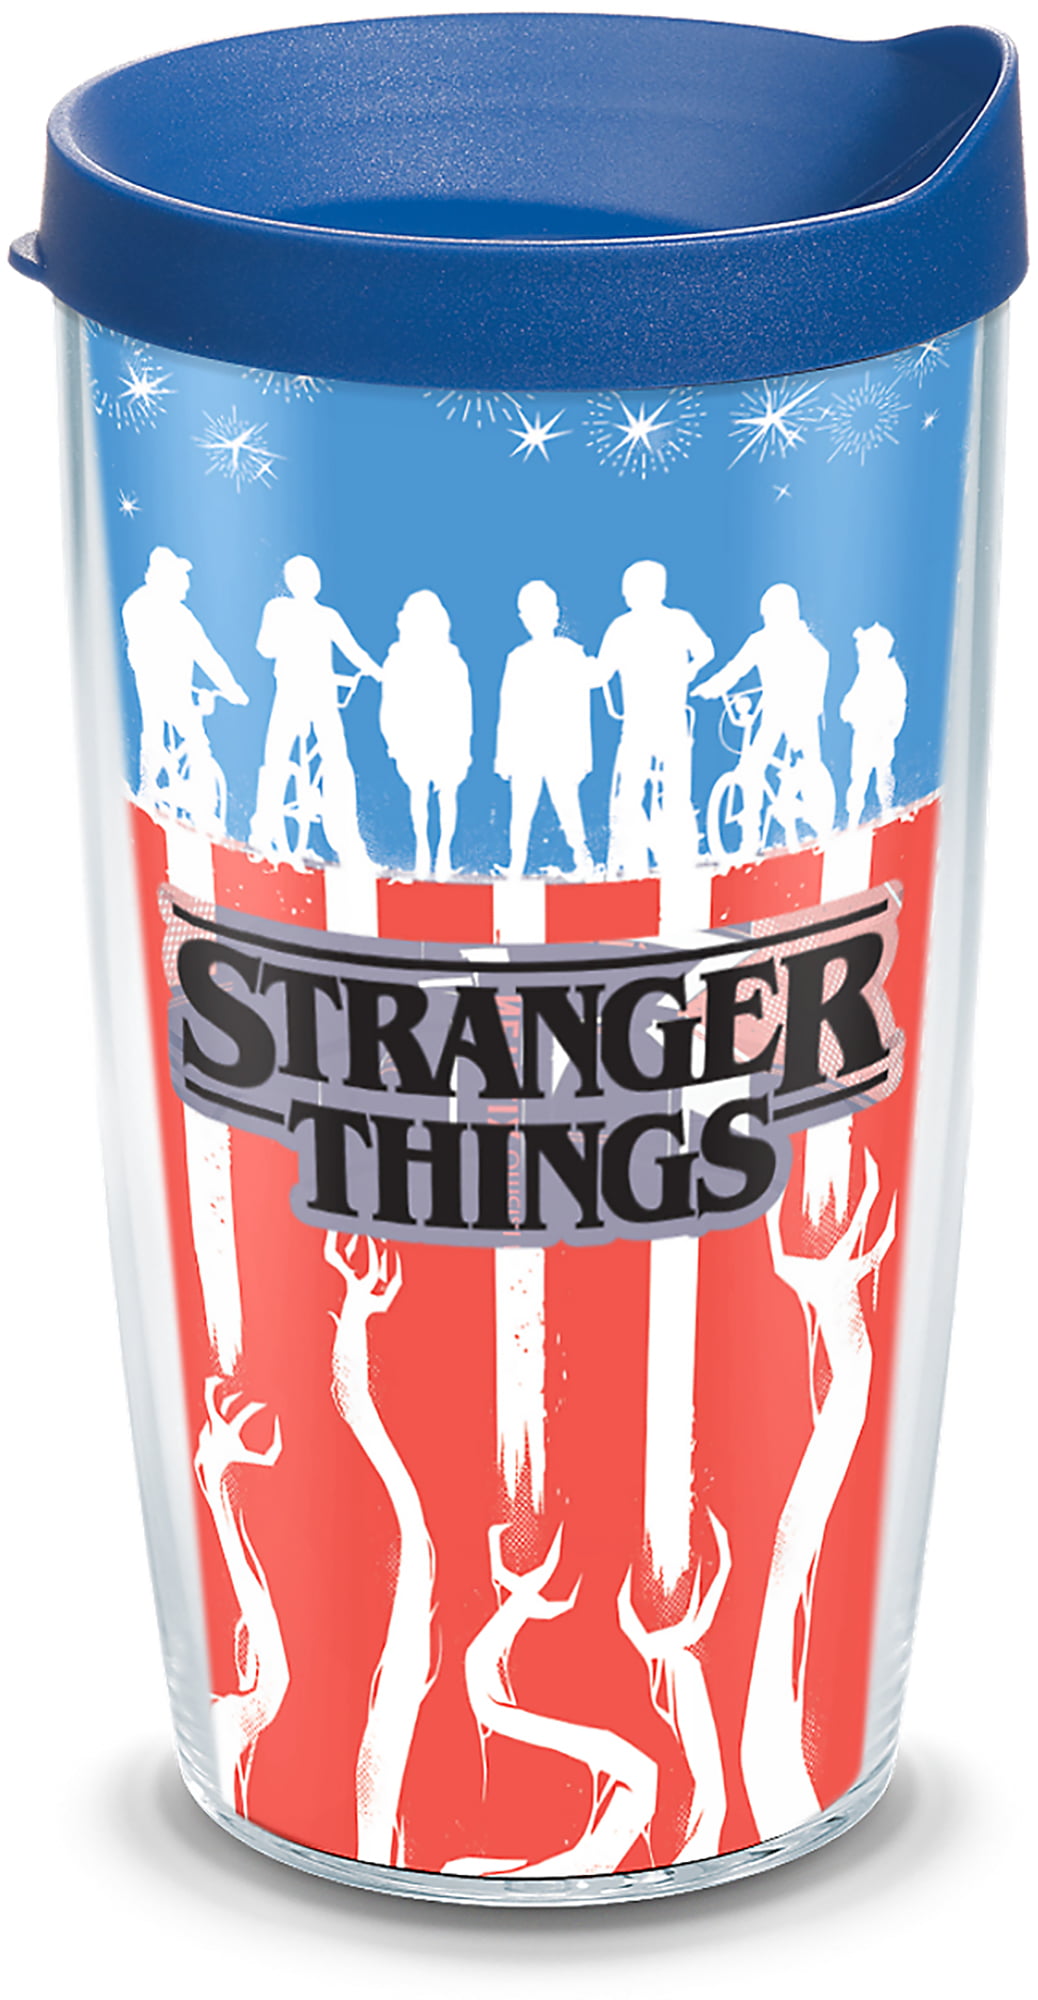 Tervis Double Walled Stranger Things Insulated Tumbler Cup Keeps